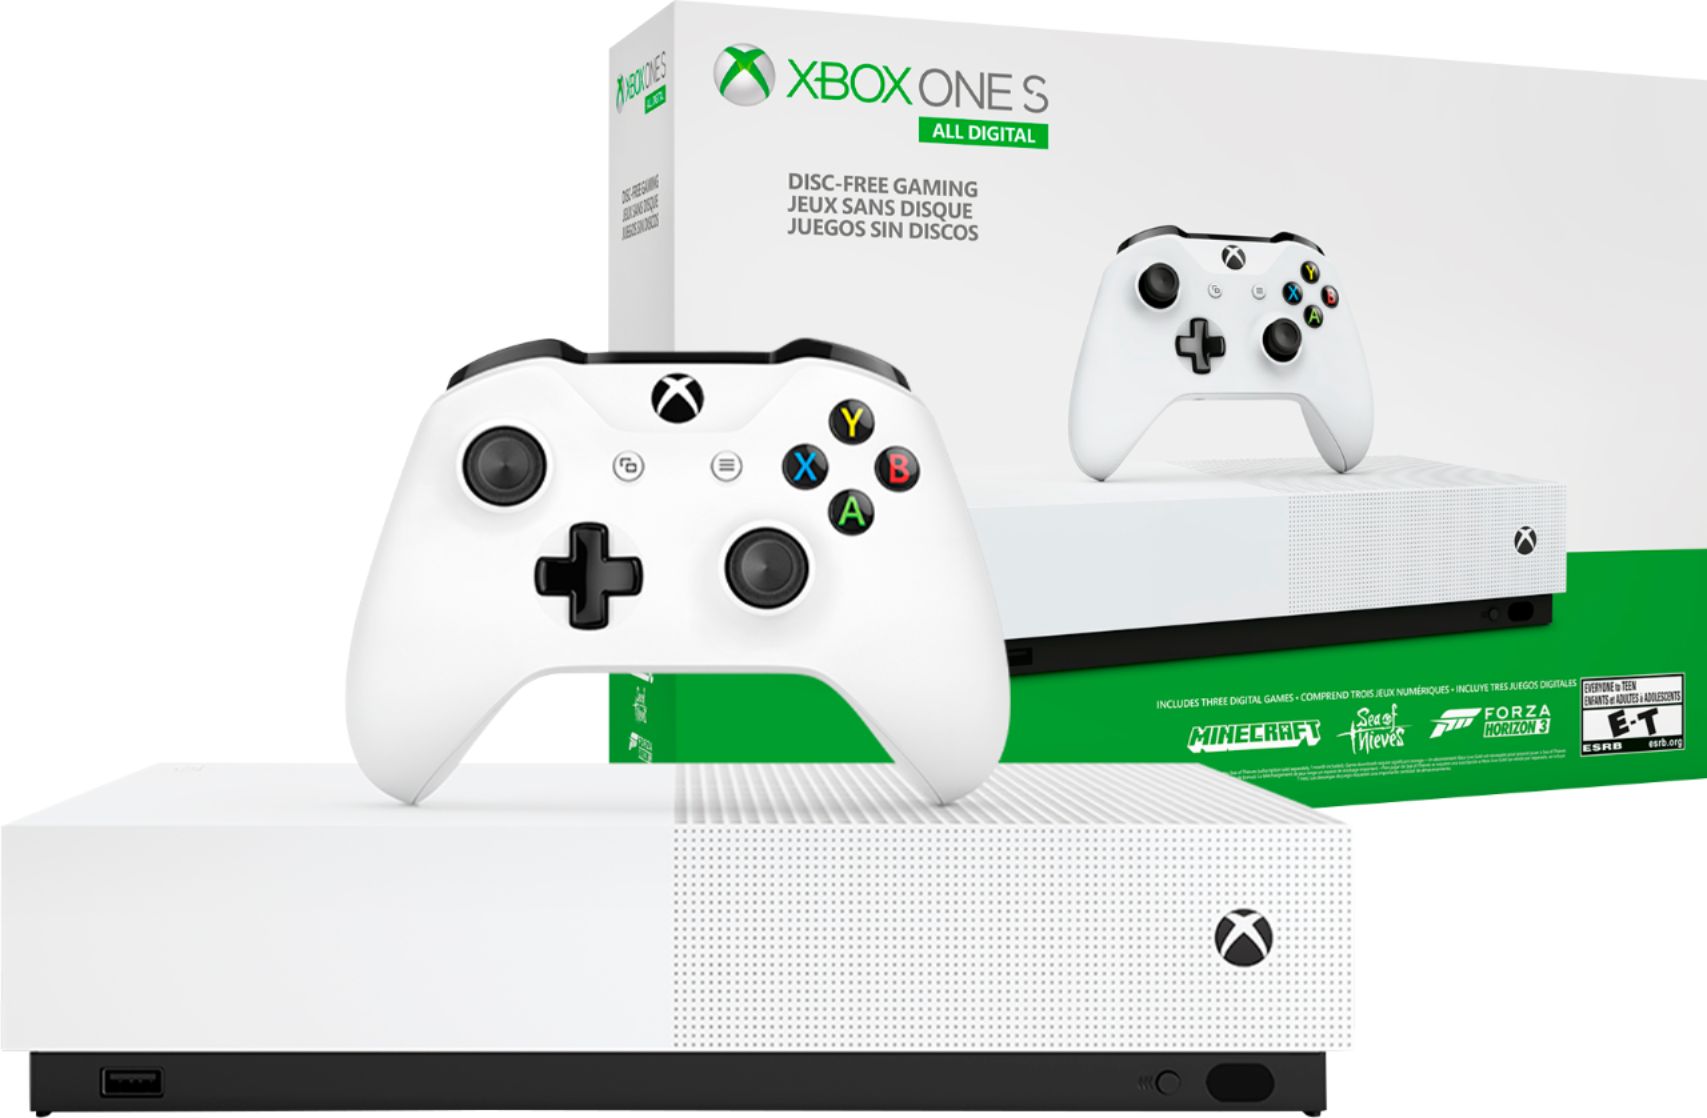 Xbox One S 1TB All-Digital Edition Console (Disc-free Gaming) Best Buy